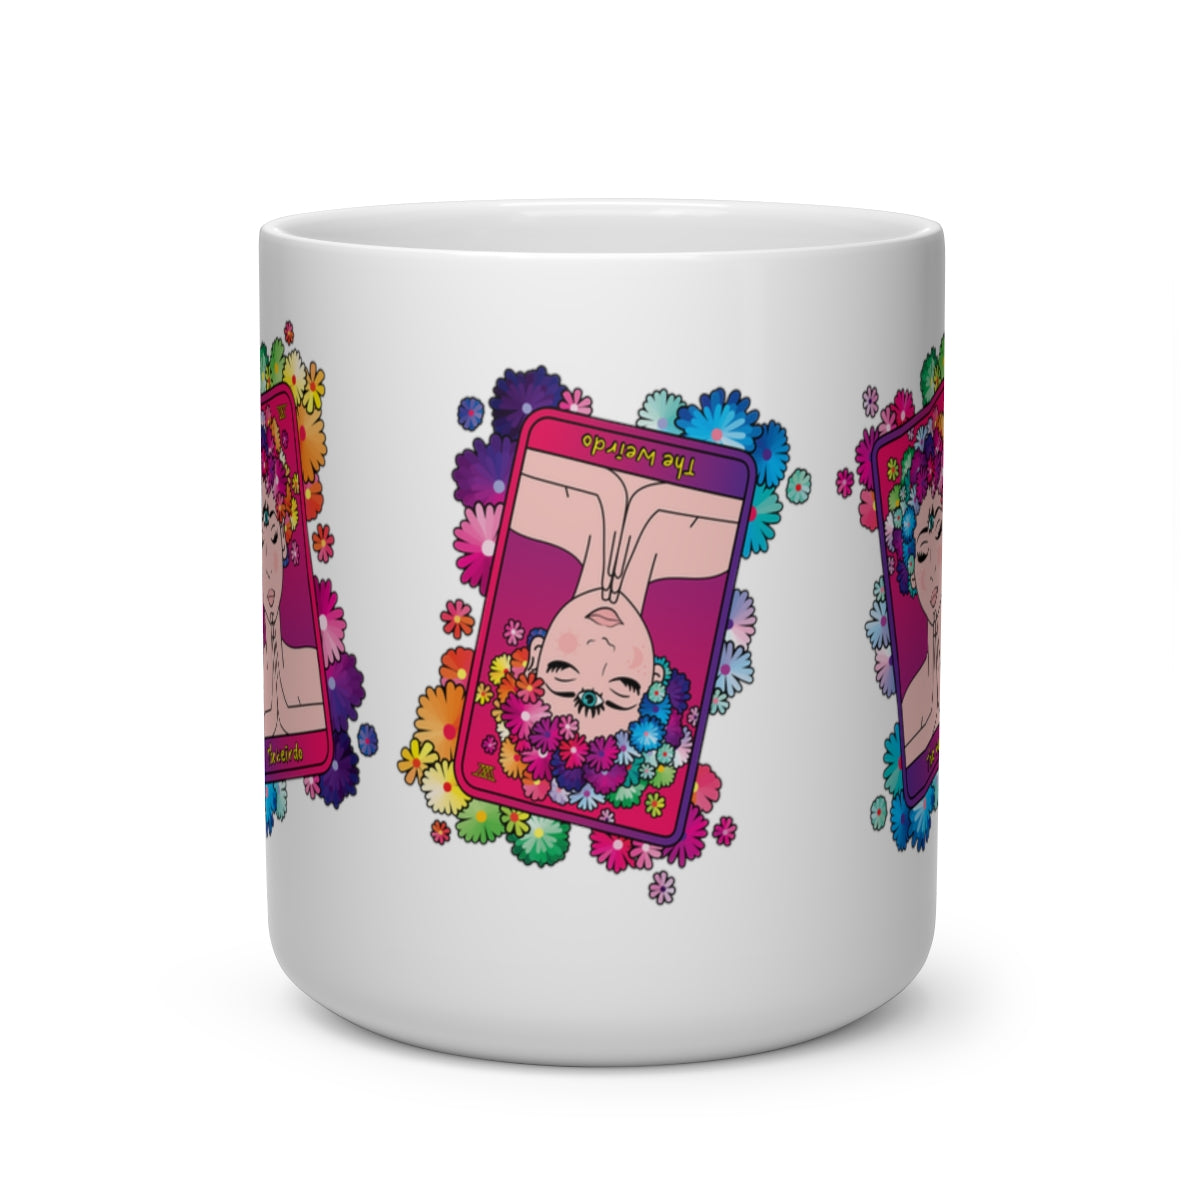 #WEIRDO | The Weirdo tarot card is displayed tree times on this white heart shaped handle mug! If you like spirituality, tarot cards and are looking for a weird gift, this is for you!